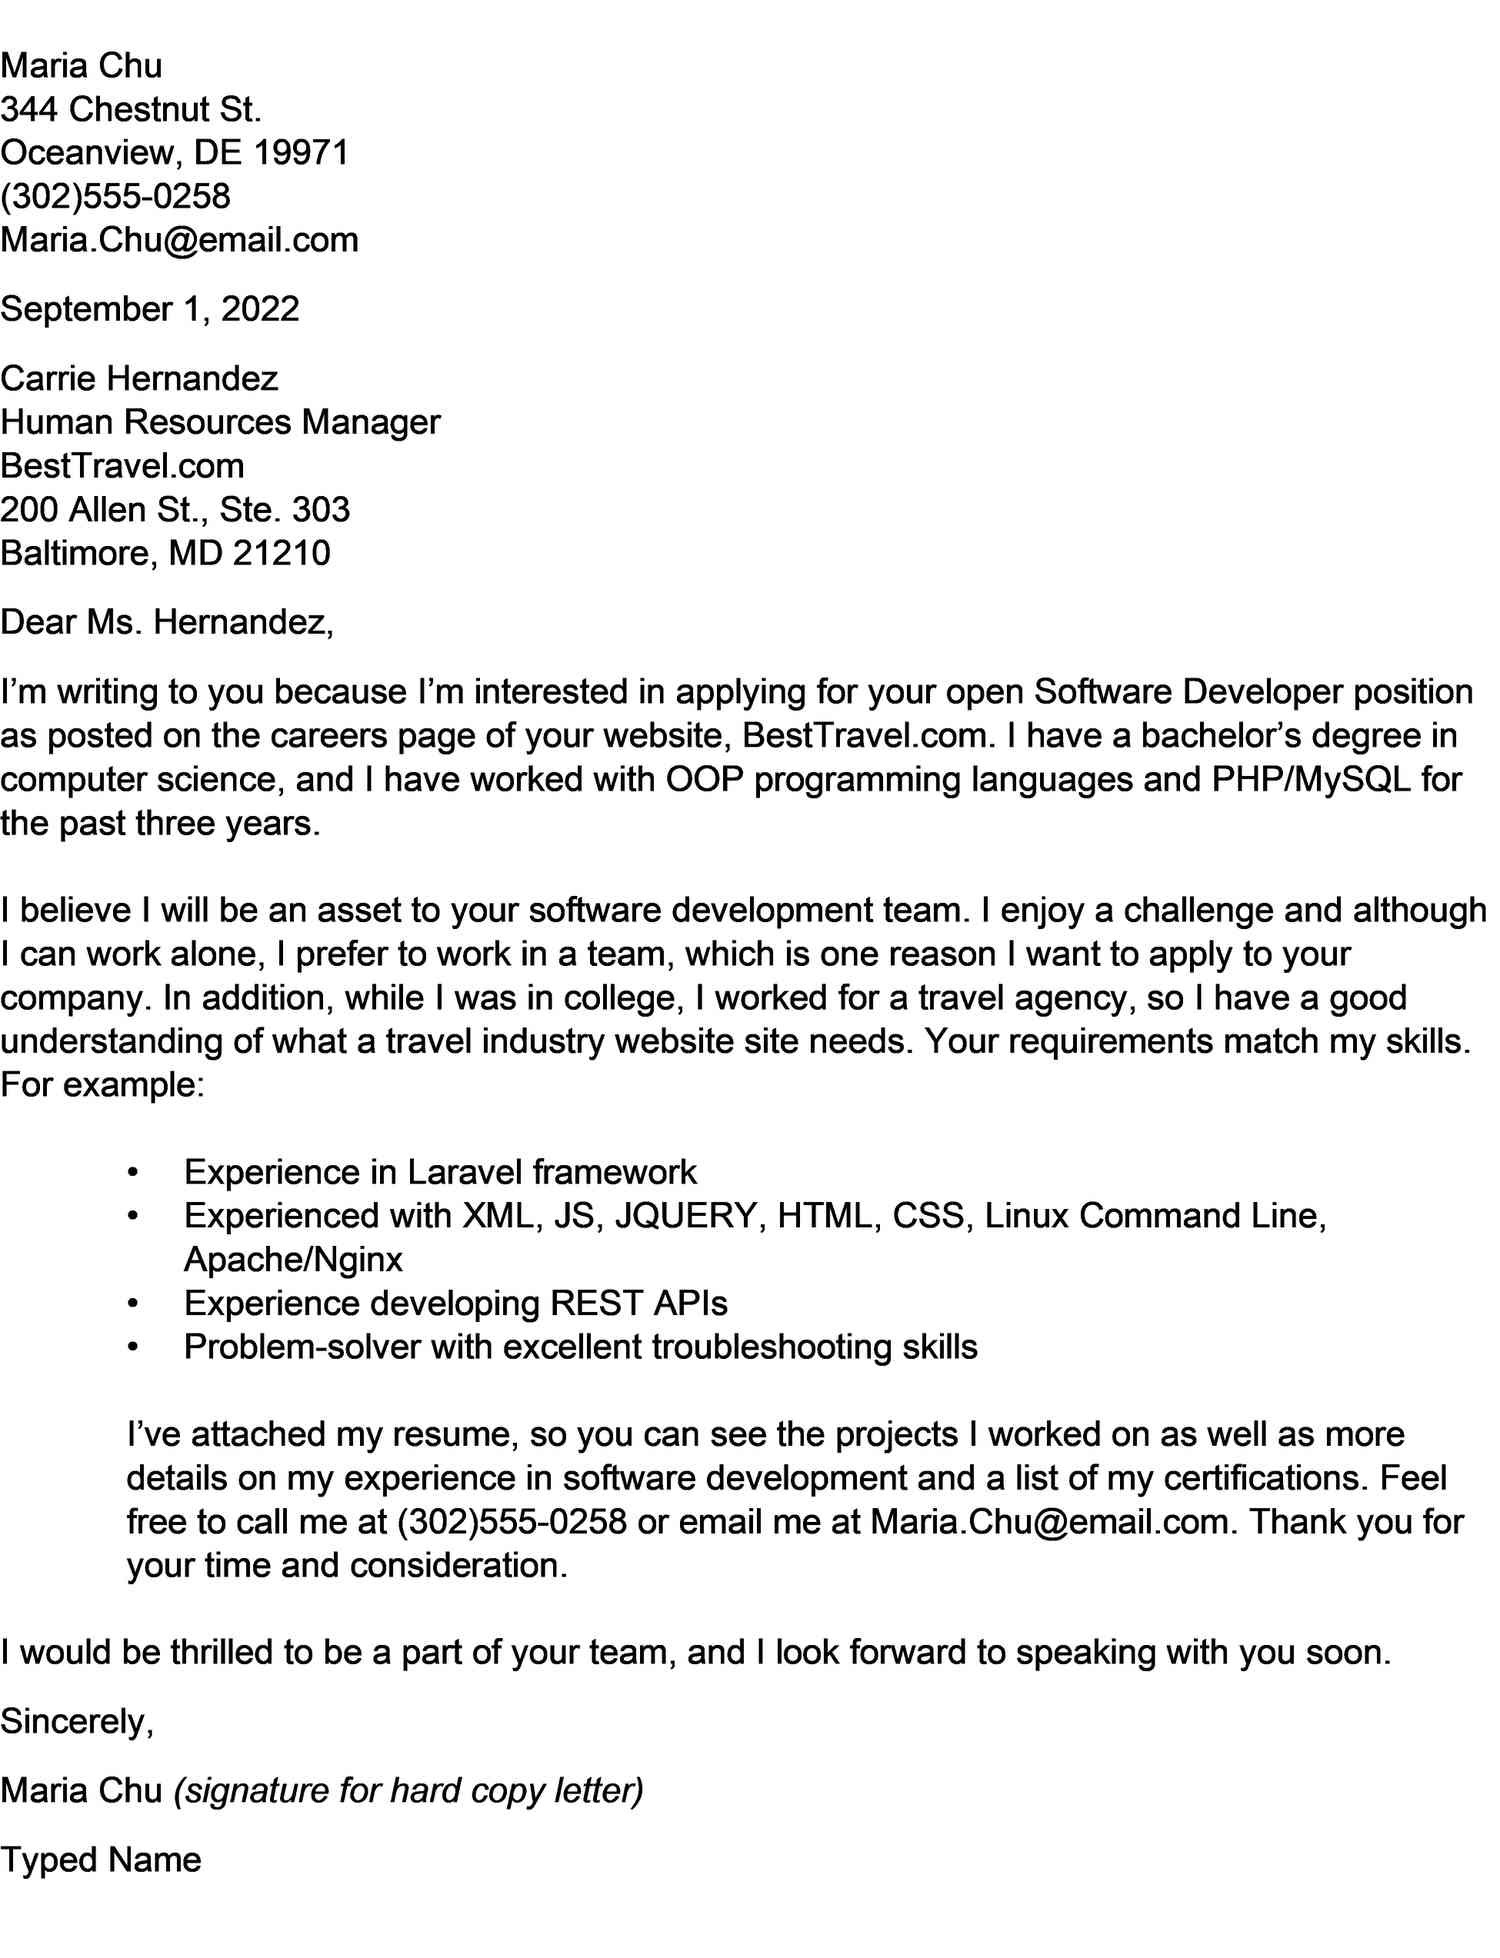 Email Cover Letter Resume attached Sample Cover Letter Examples Listed by Type Of Job